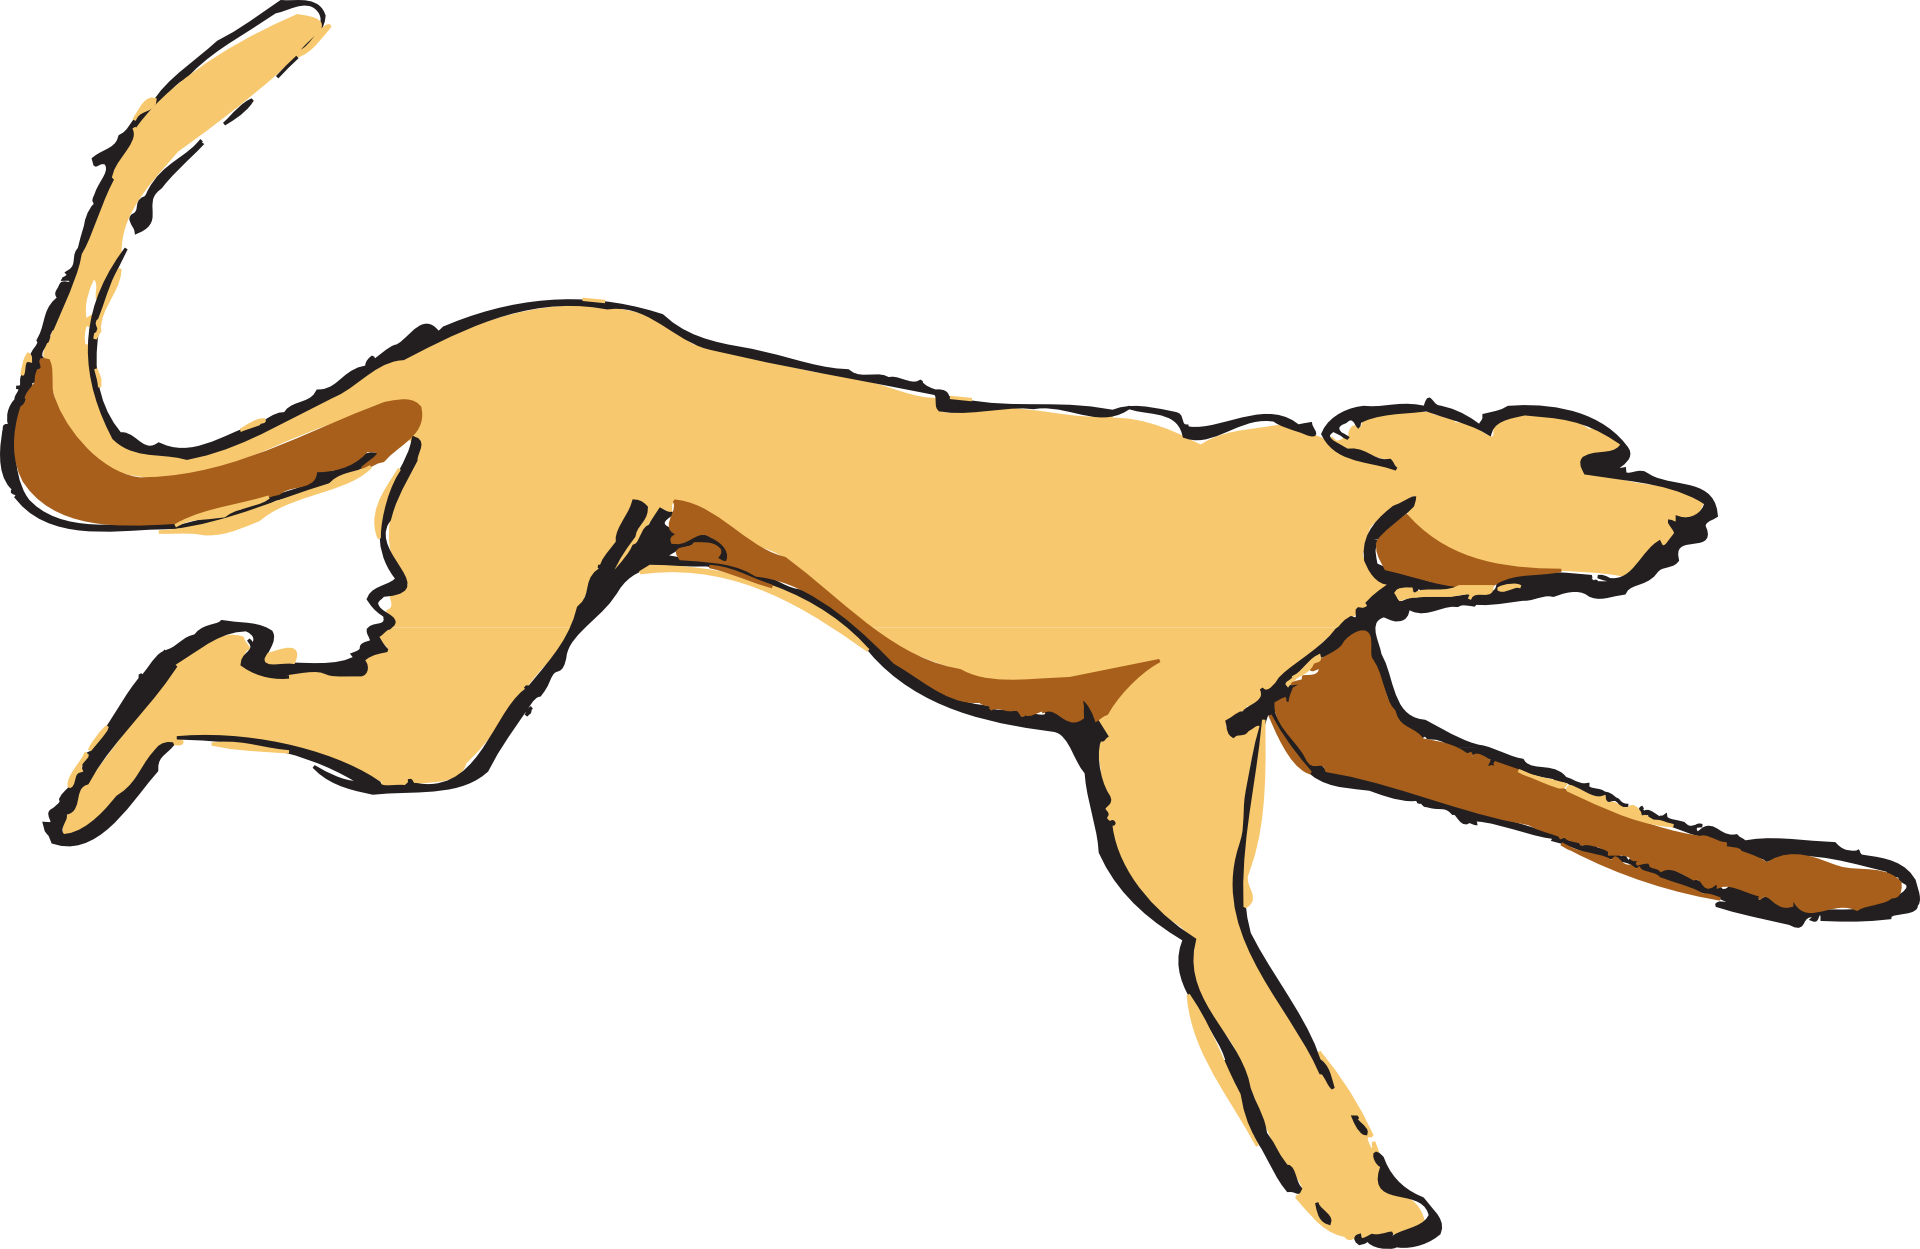 Brown Dog Running vector drawing free image download